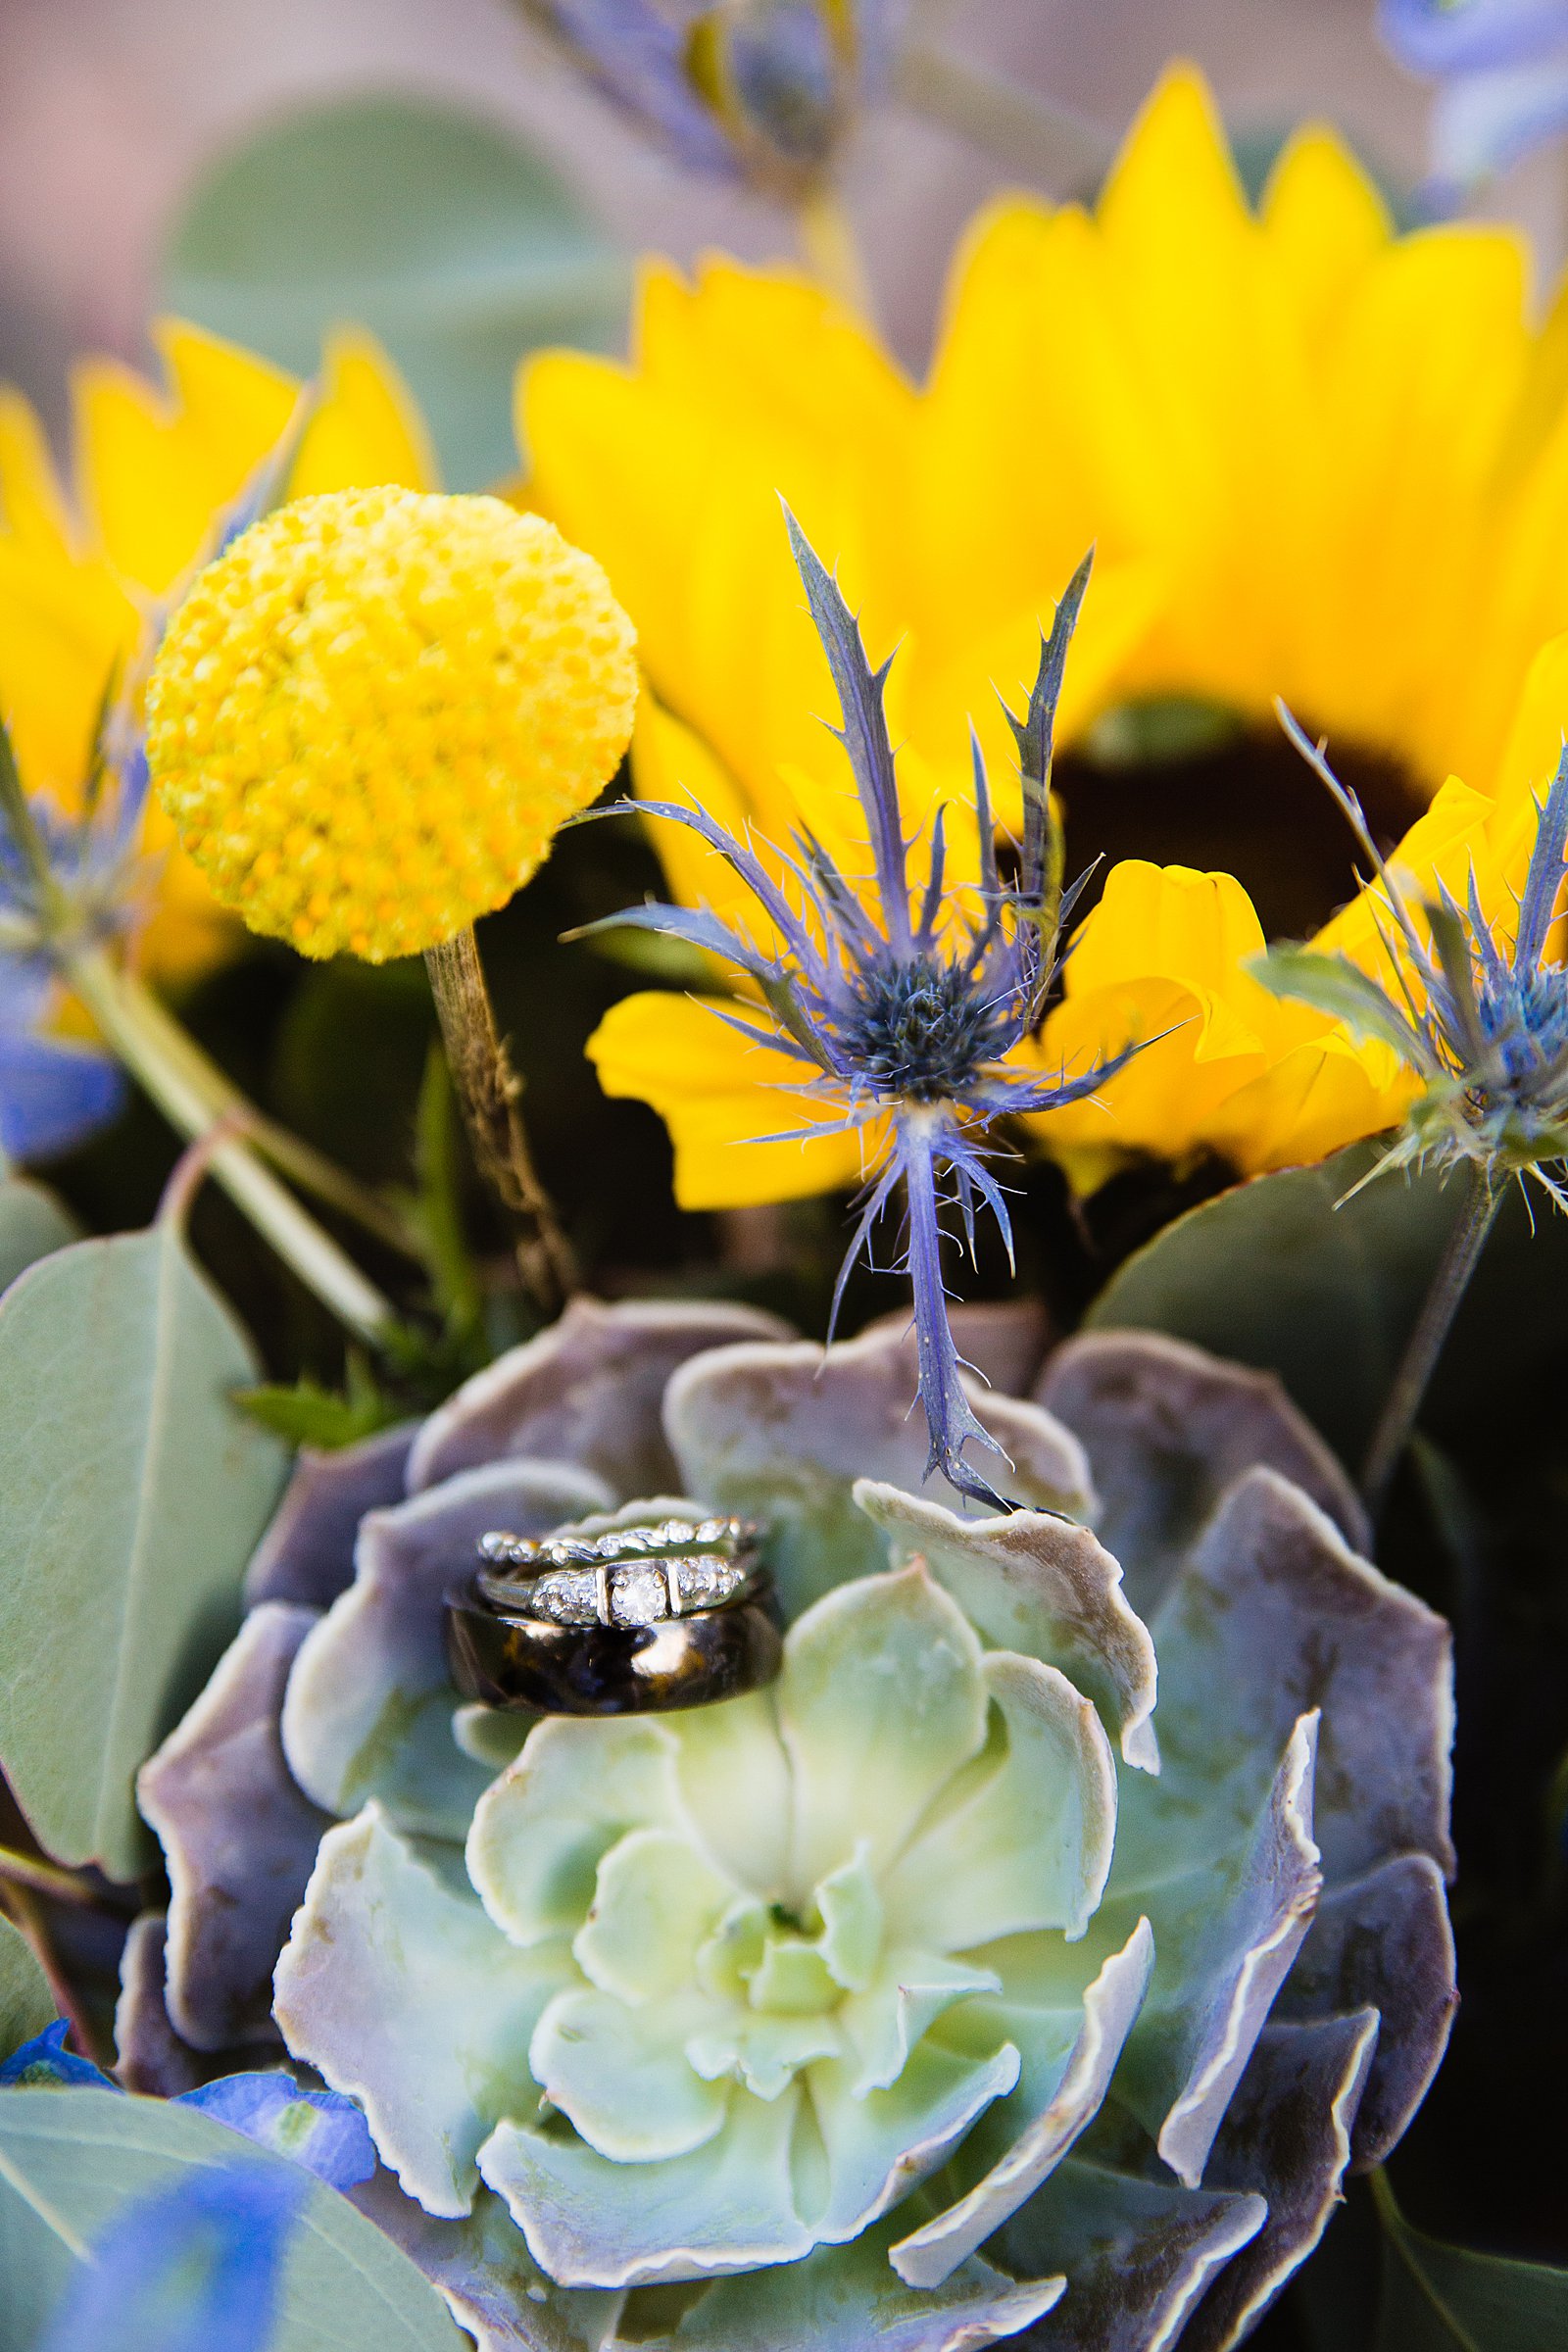 Bride and groom's wedding rings on a yellow and succulent bouquet by PMA Photography.